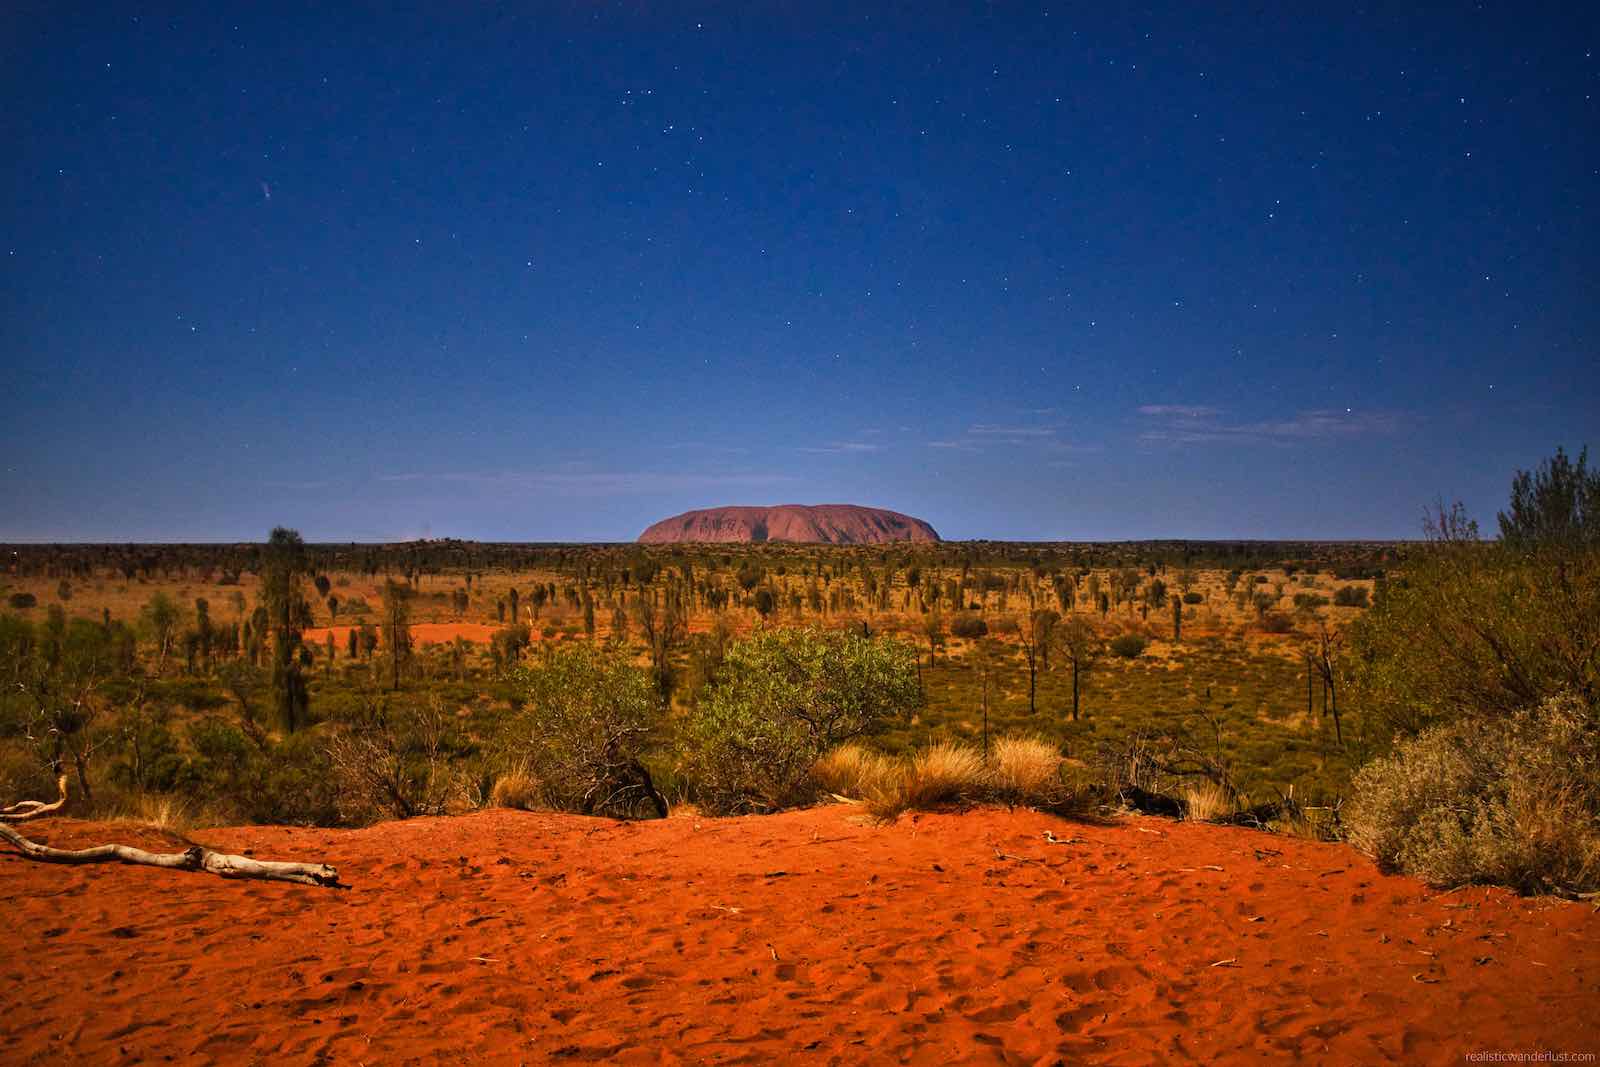 Stayed around after sundown because the temperatures were much nicer at night and the full moon was so bright it lit up the landscape. Got this nice long exposure shot of Uluru